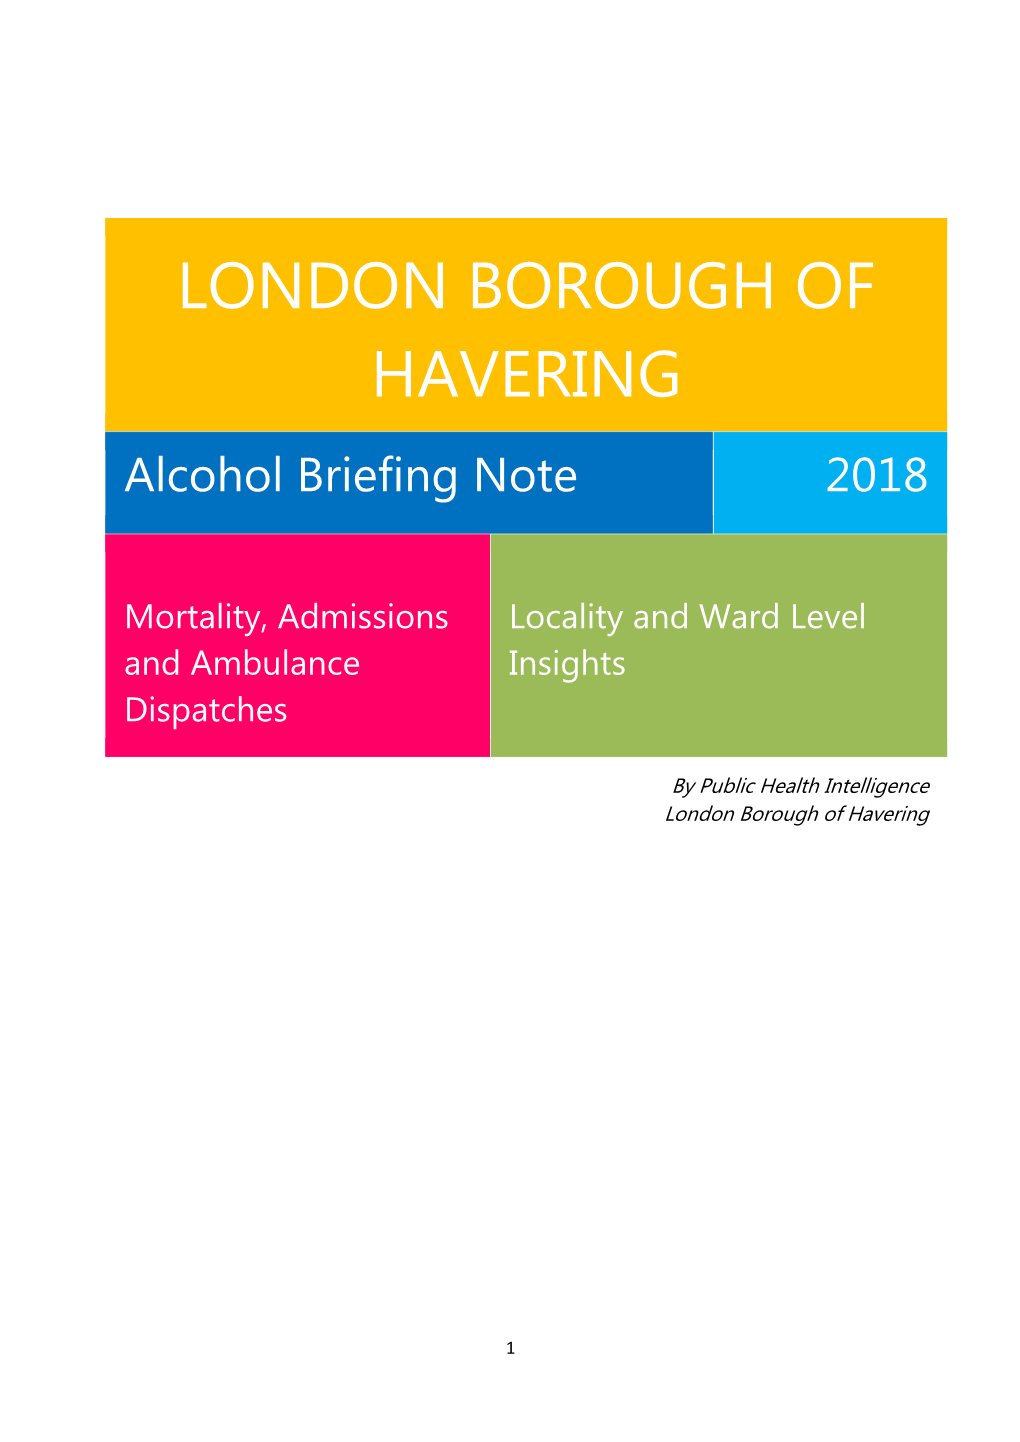 Alcohol Briefing Report 2018